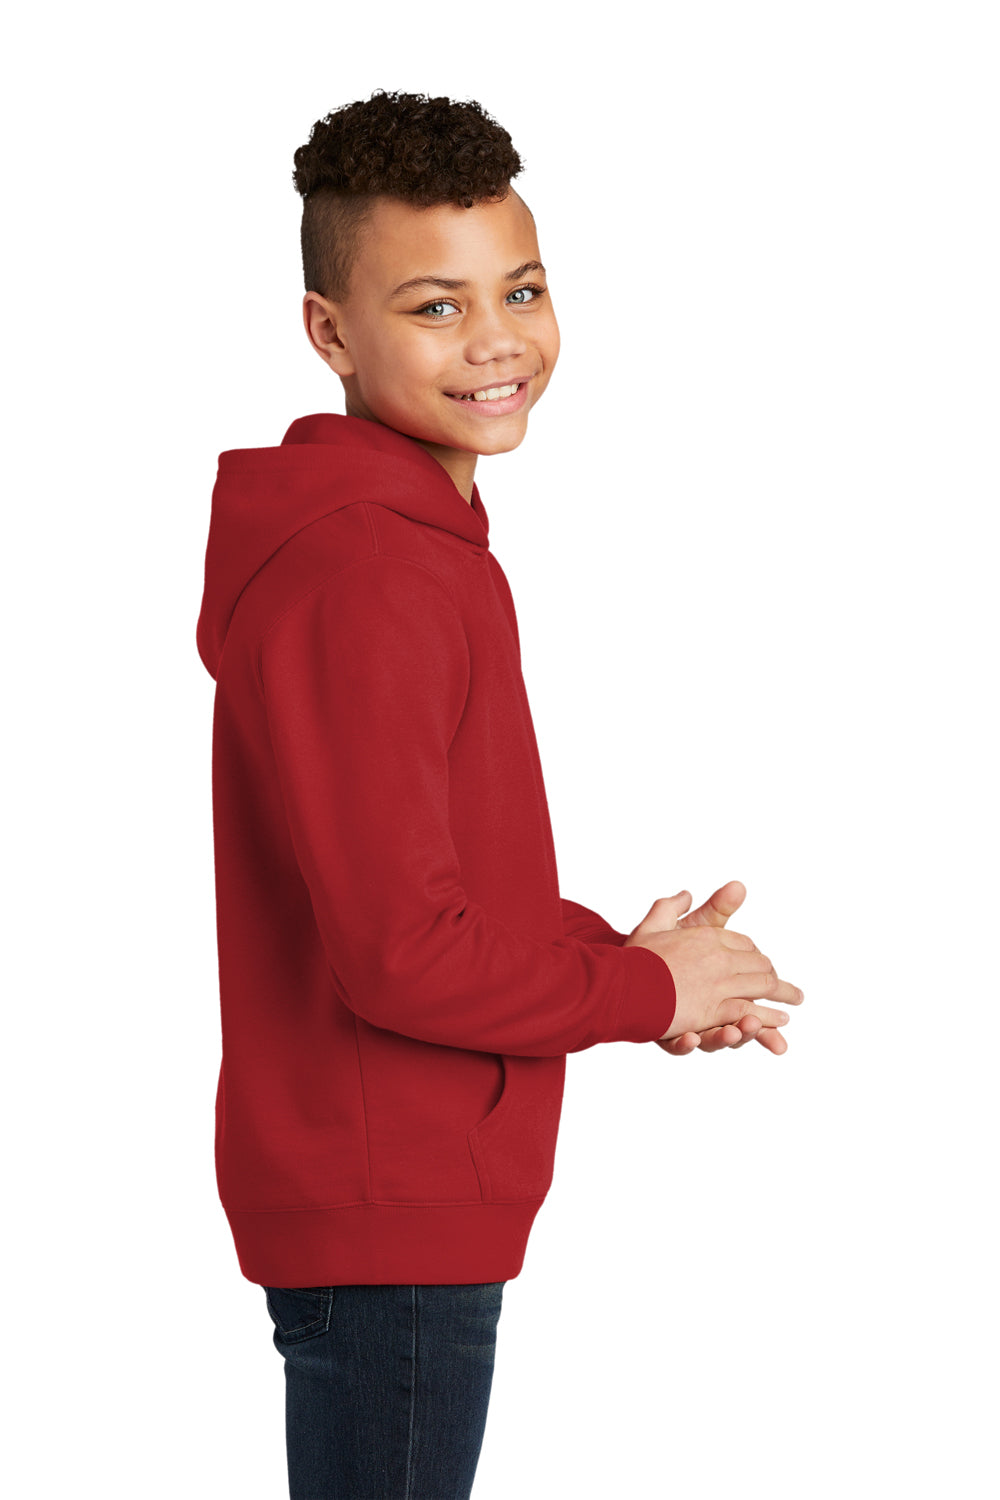 District Youth Very Important Fleece Hooded Sweatshirt Hoodie Classic Red Side